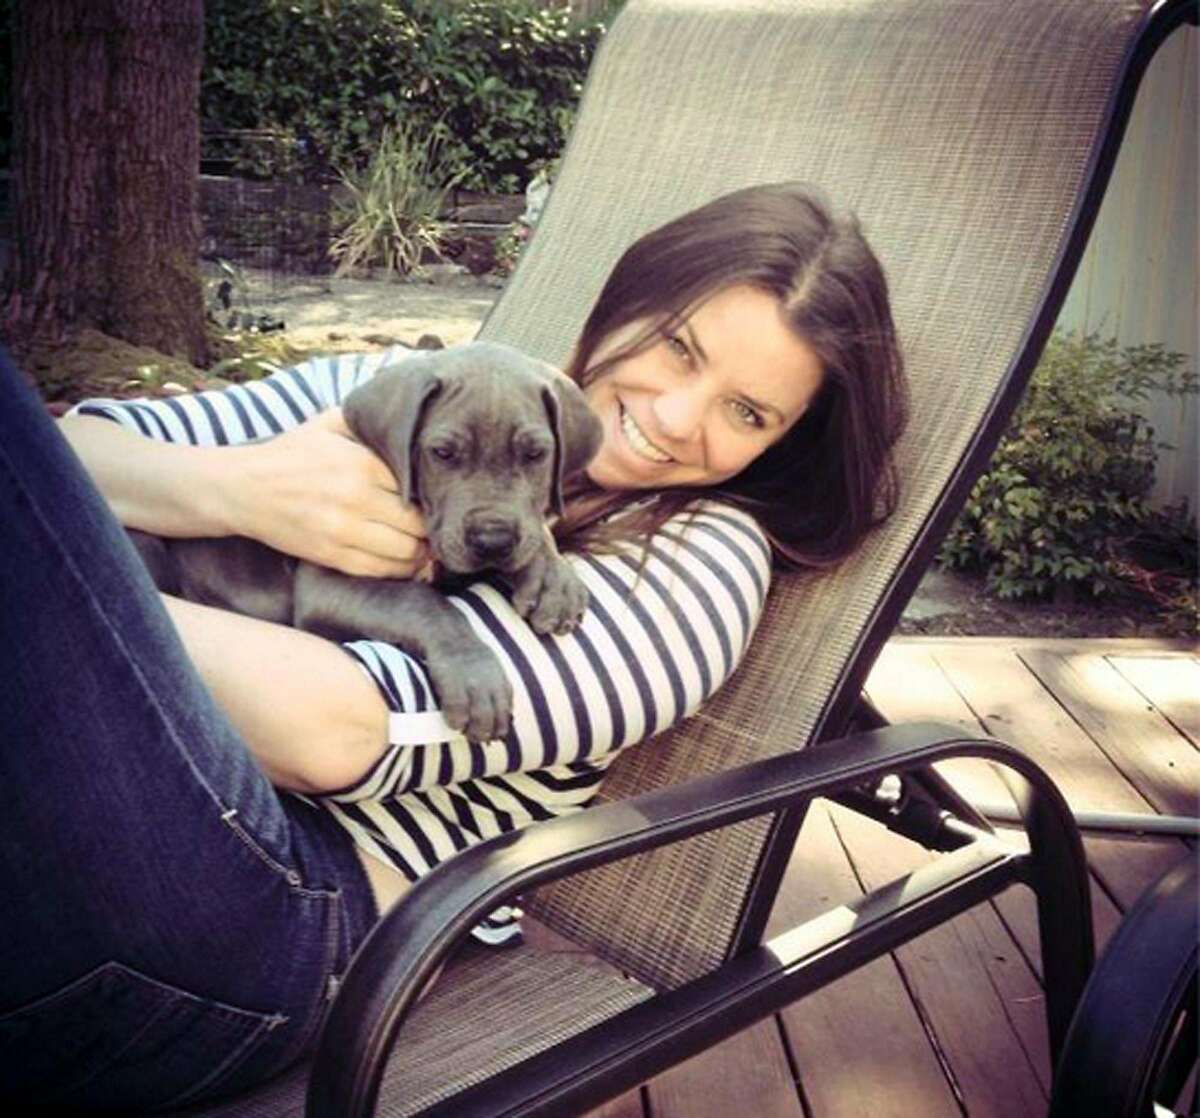 FILE - This undated file photo provided by the Maynard family shows Brittany Maynard, a 29-year-old terminally ill woman who plans to take her own life under Oregon’s death with dignity law. Maynard, who has advanced brain cancer, has said she plans use Oregon's death-with-dignity law to end her own life Saturday, Nov. 1, 2014 though she could still change her mind. (AP Photo/Maynard Family, File)